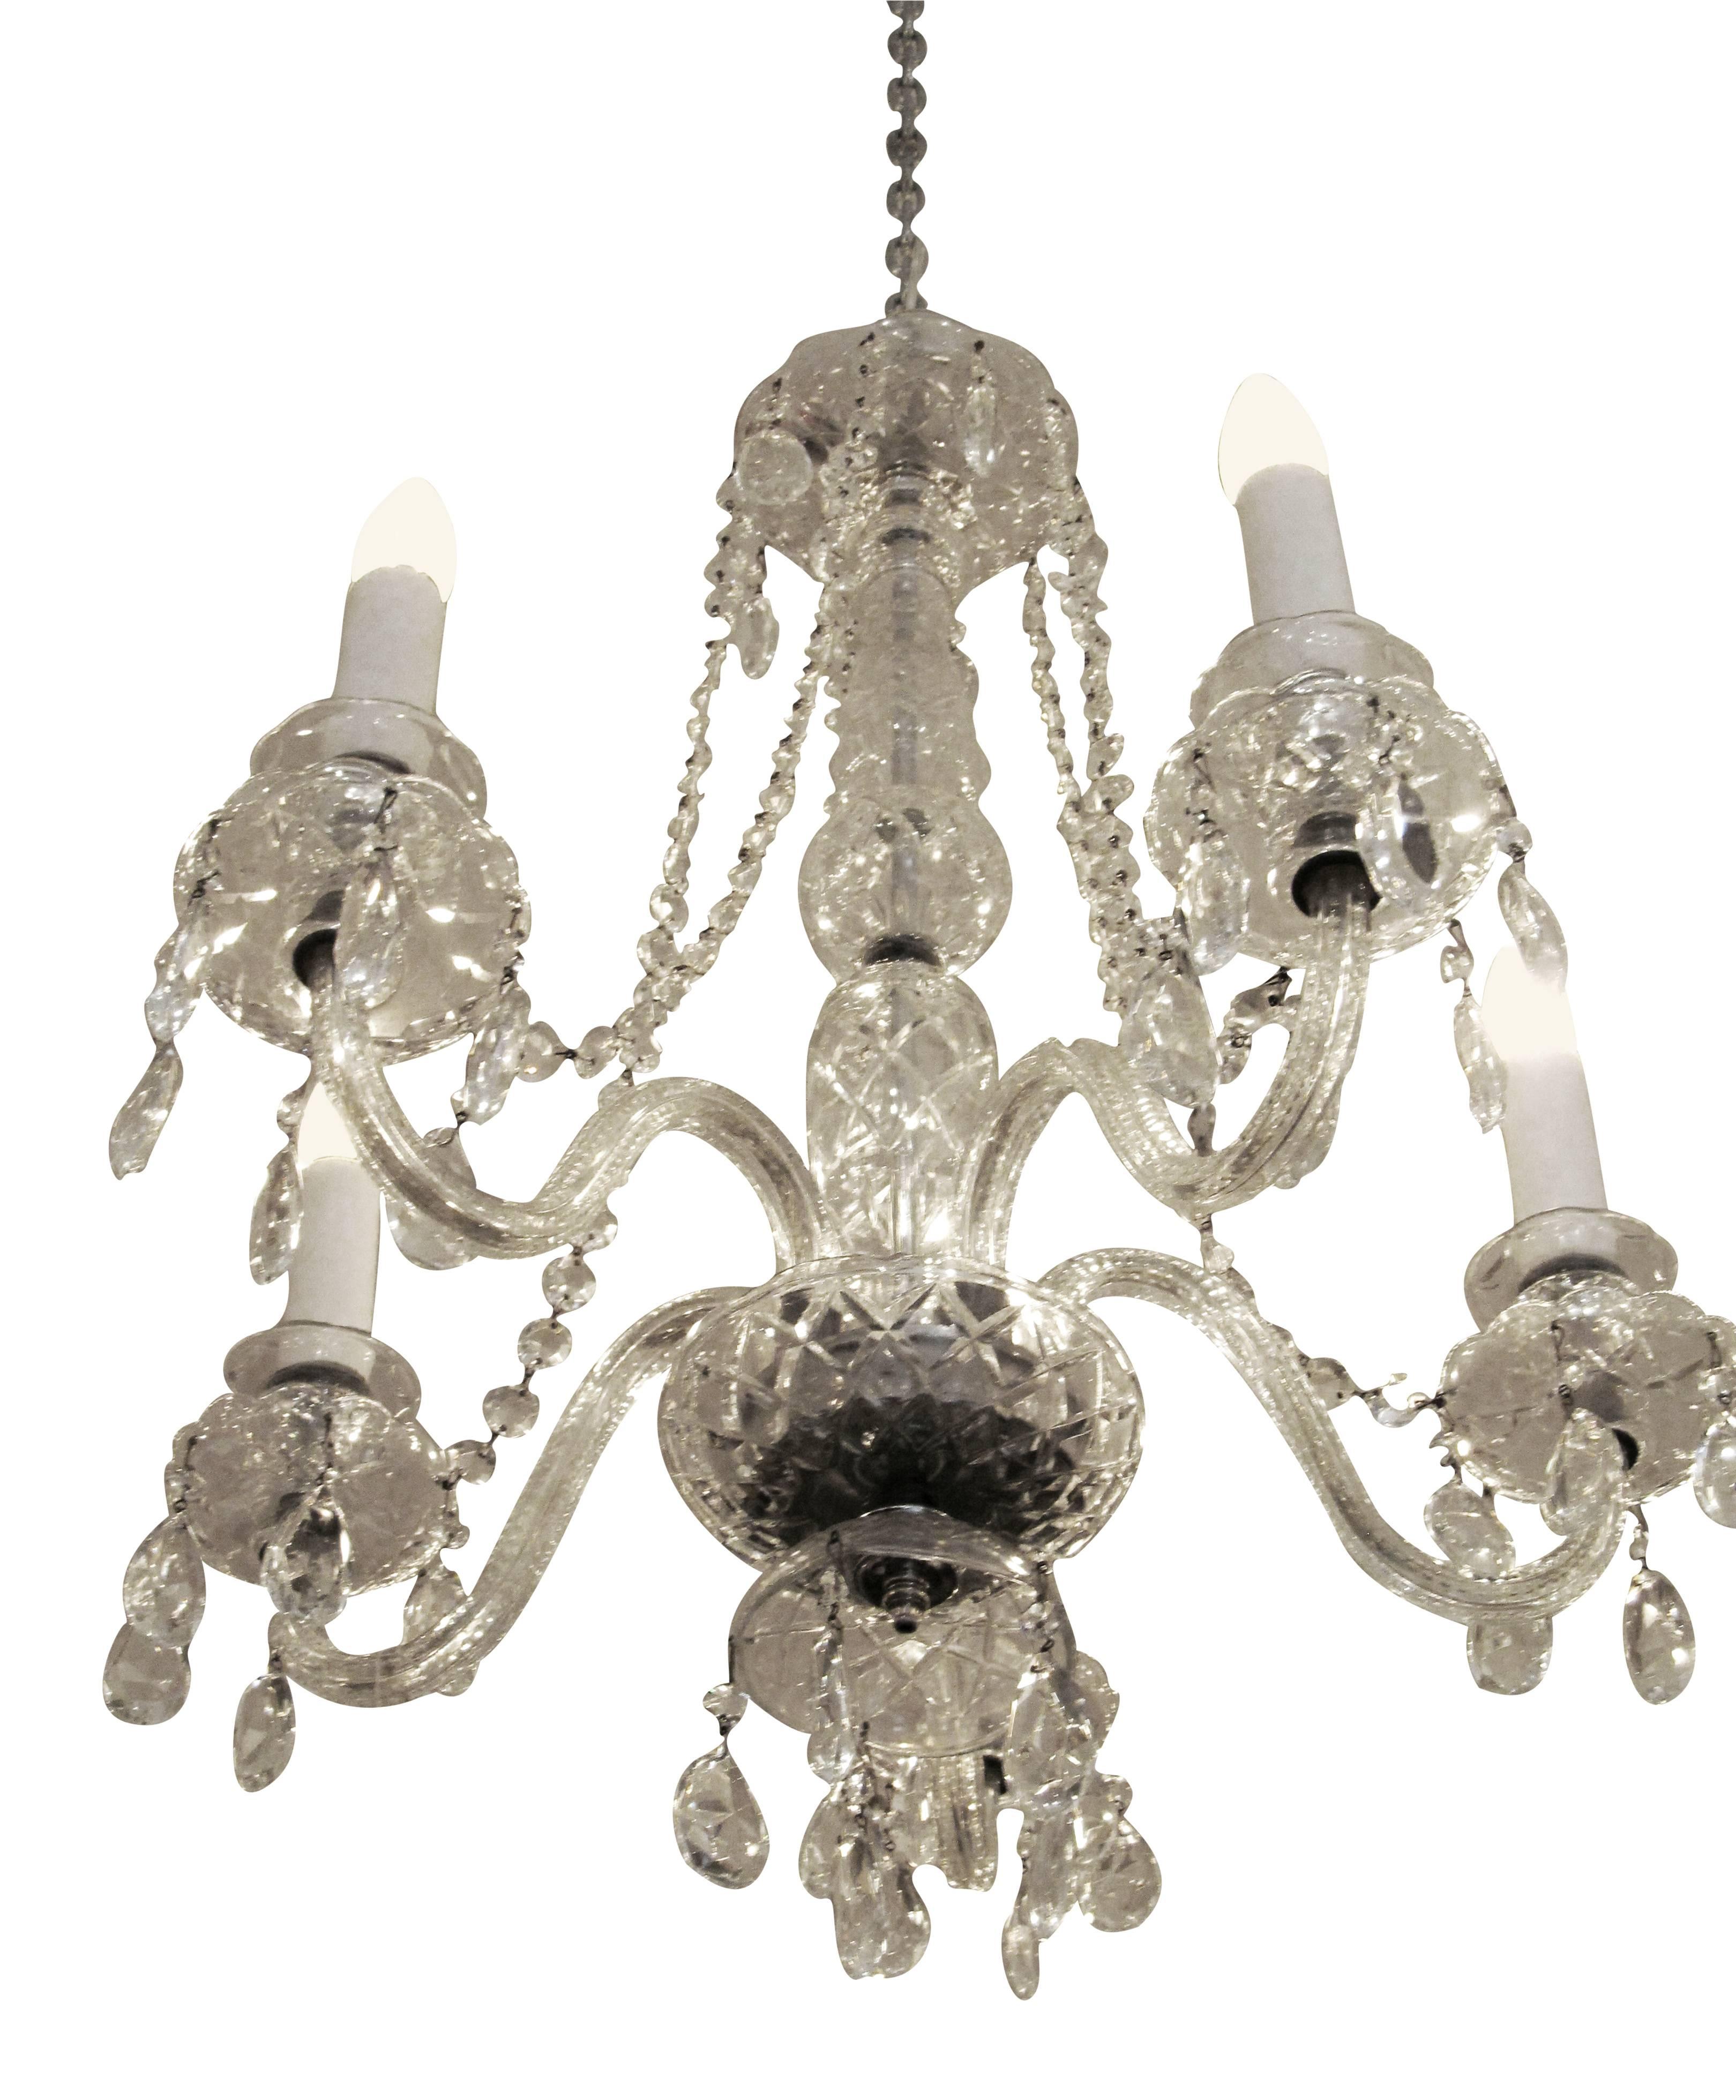 1940s Restored crystal five-arm chandelier. Made in Waterford, Ireland. Waterford crystal is renowned for its brilliance due to the minerals in the sand used to make the crystal. Please specify the overall drop that is needed upon purchasing. This